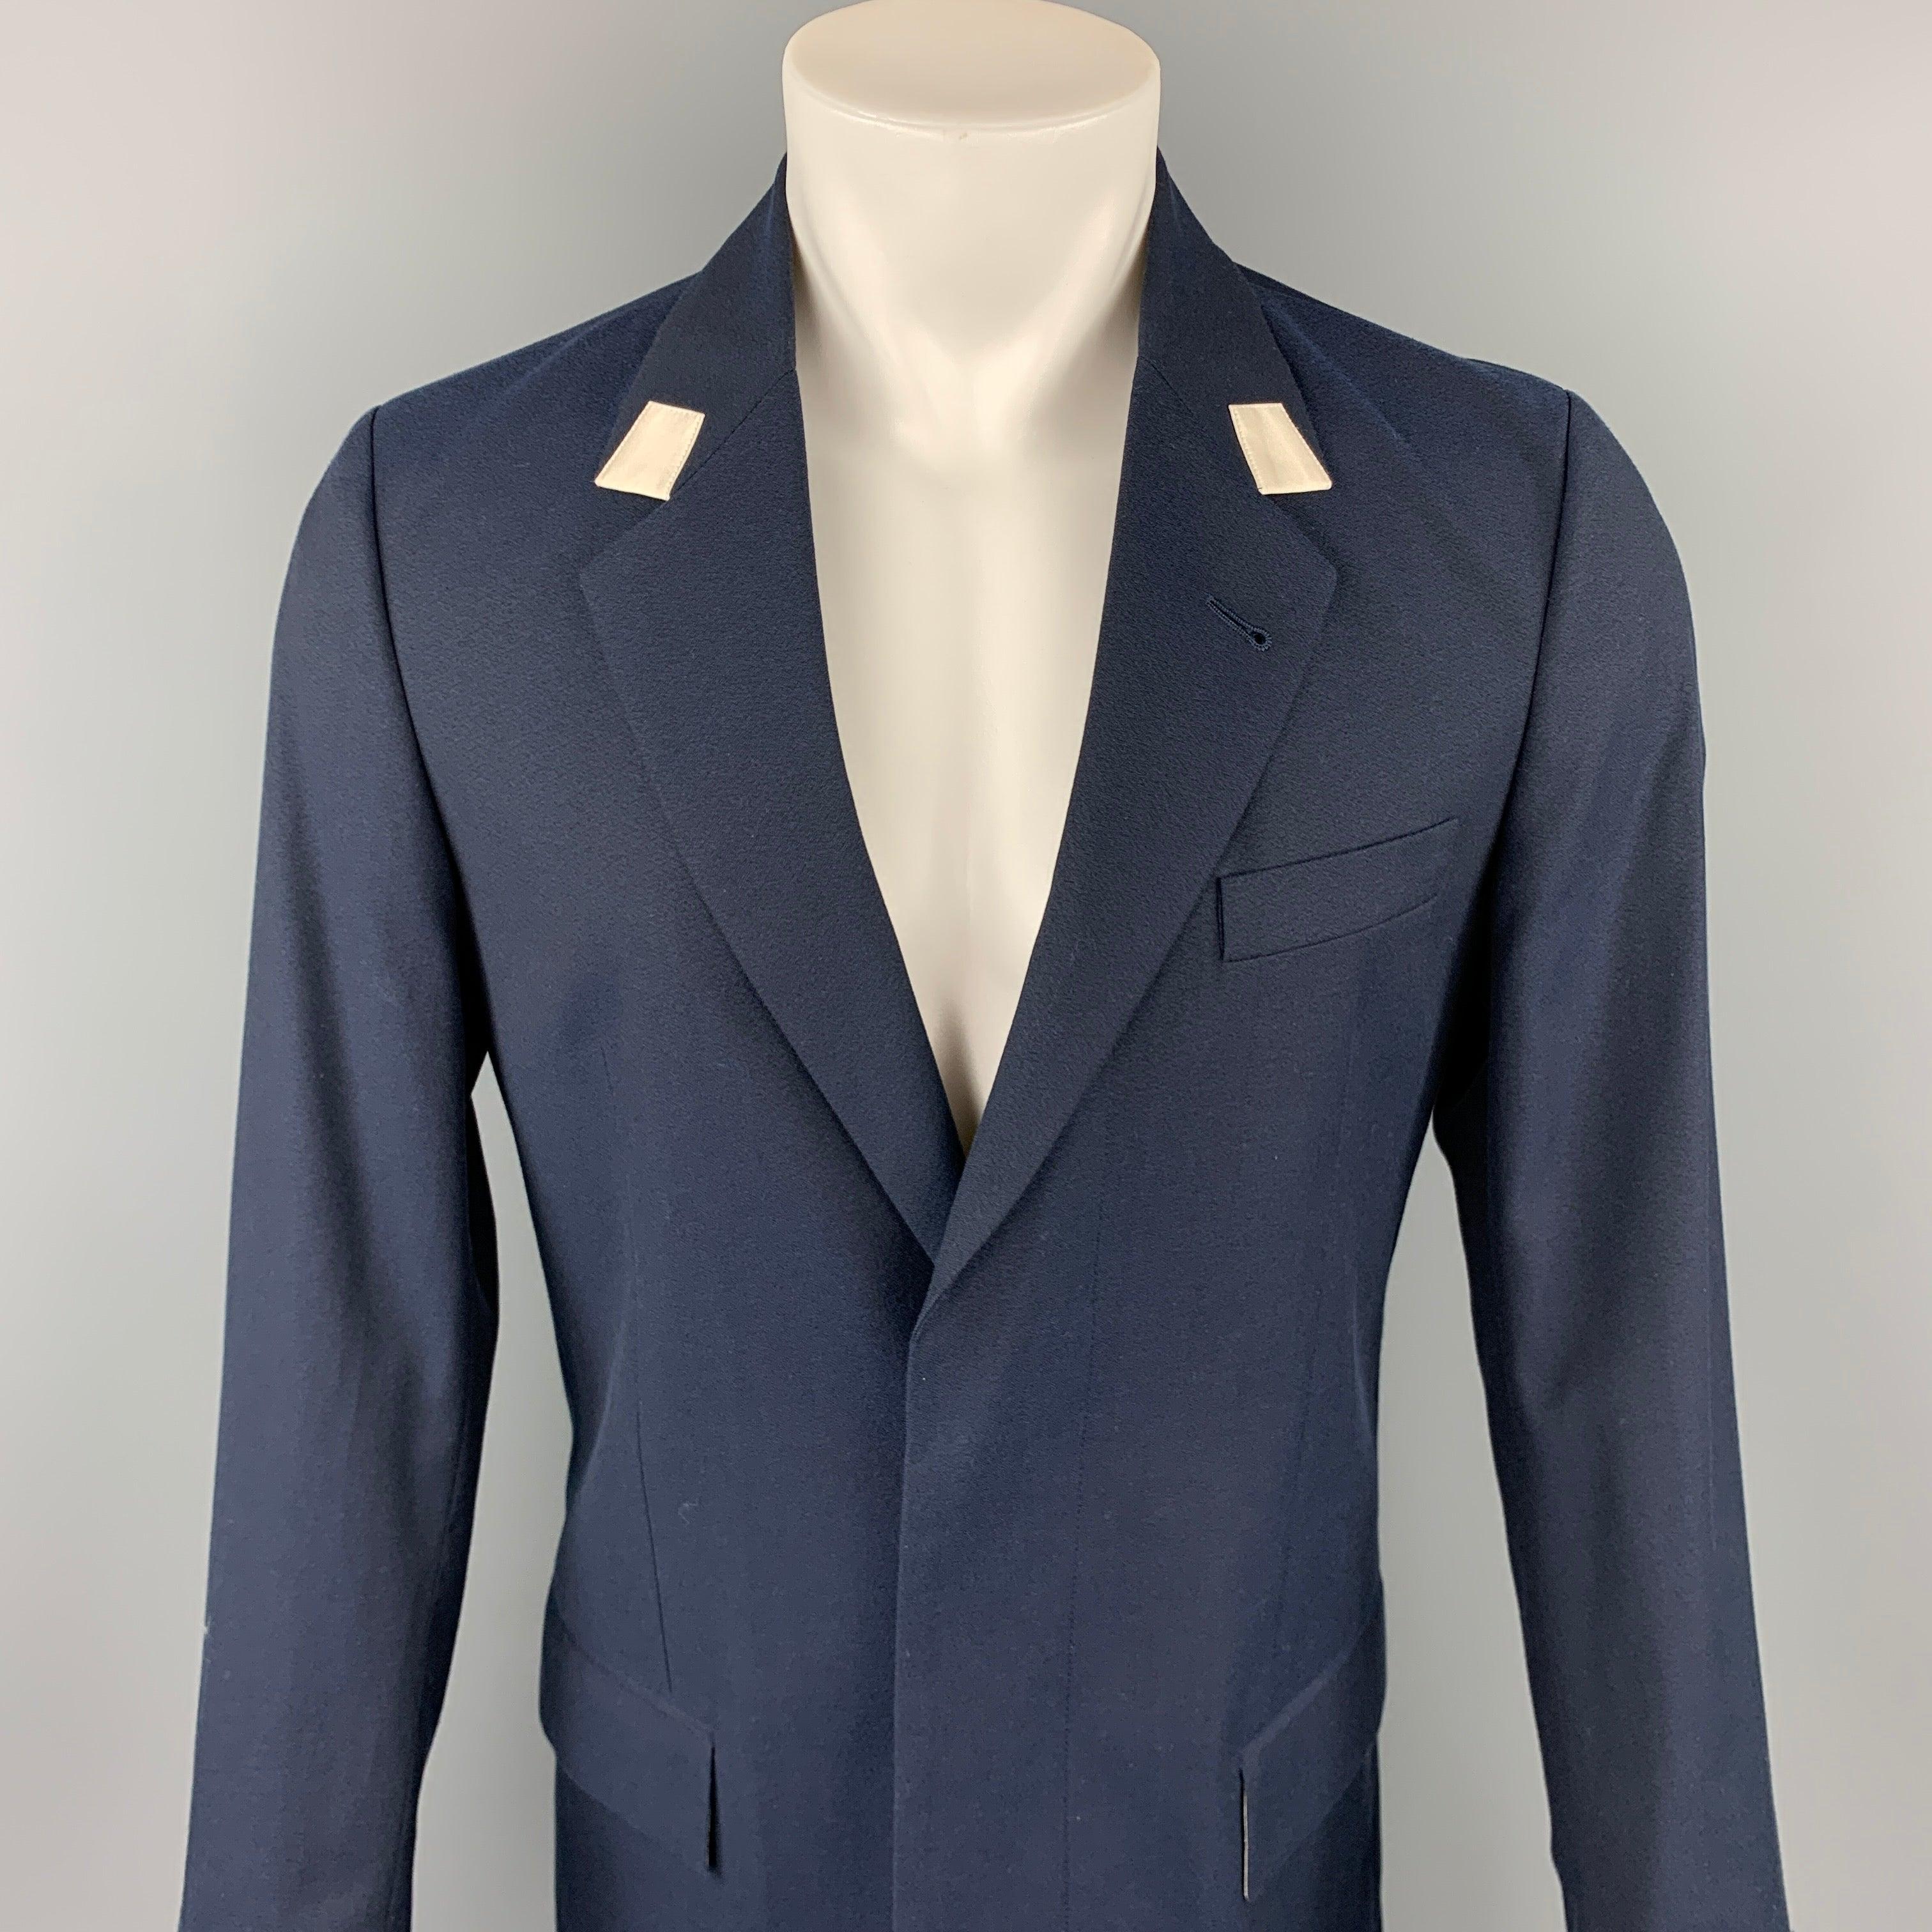 MARC JACOBS coat comes in a navy wool / cotton with a full liner featuring a notch lapel, flap pockets, and a hidden button closure. Made in Italy.Excellent
Pre-Owned Condition. 

Marked:  IT 46 

Measurements: 
 
Shoulder: 17.5 inches Chest: 38